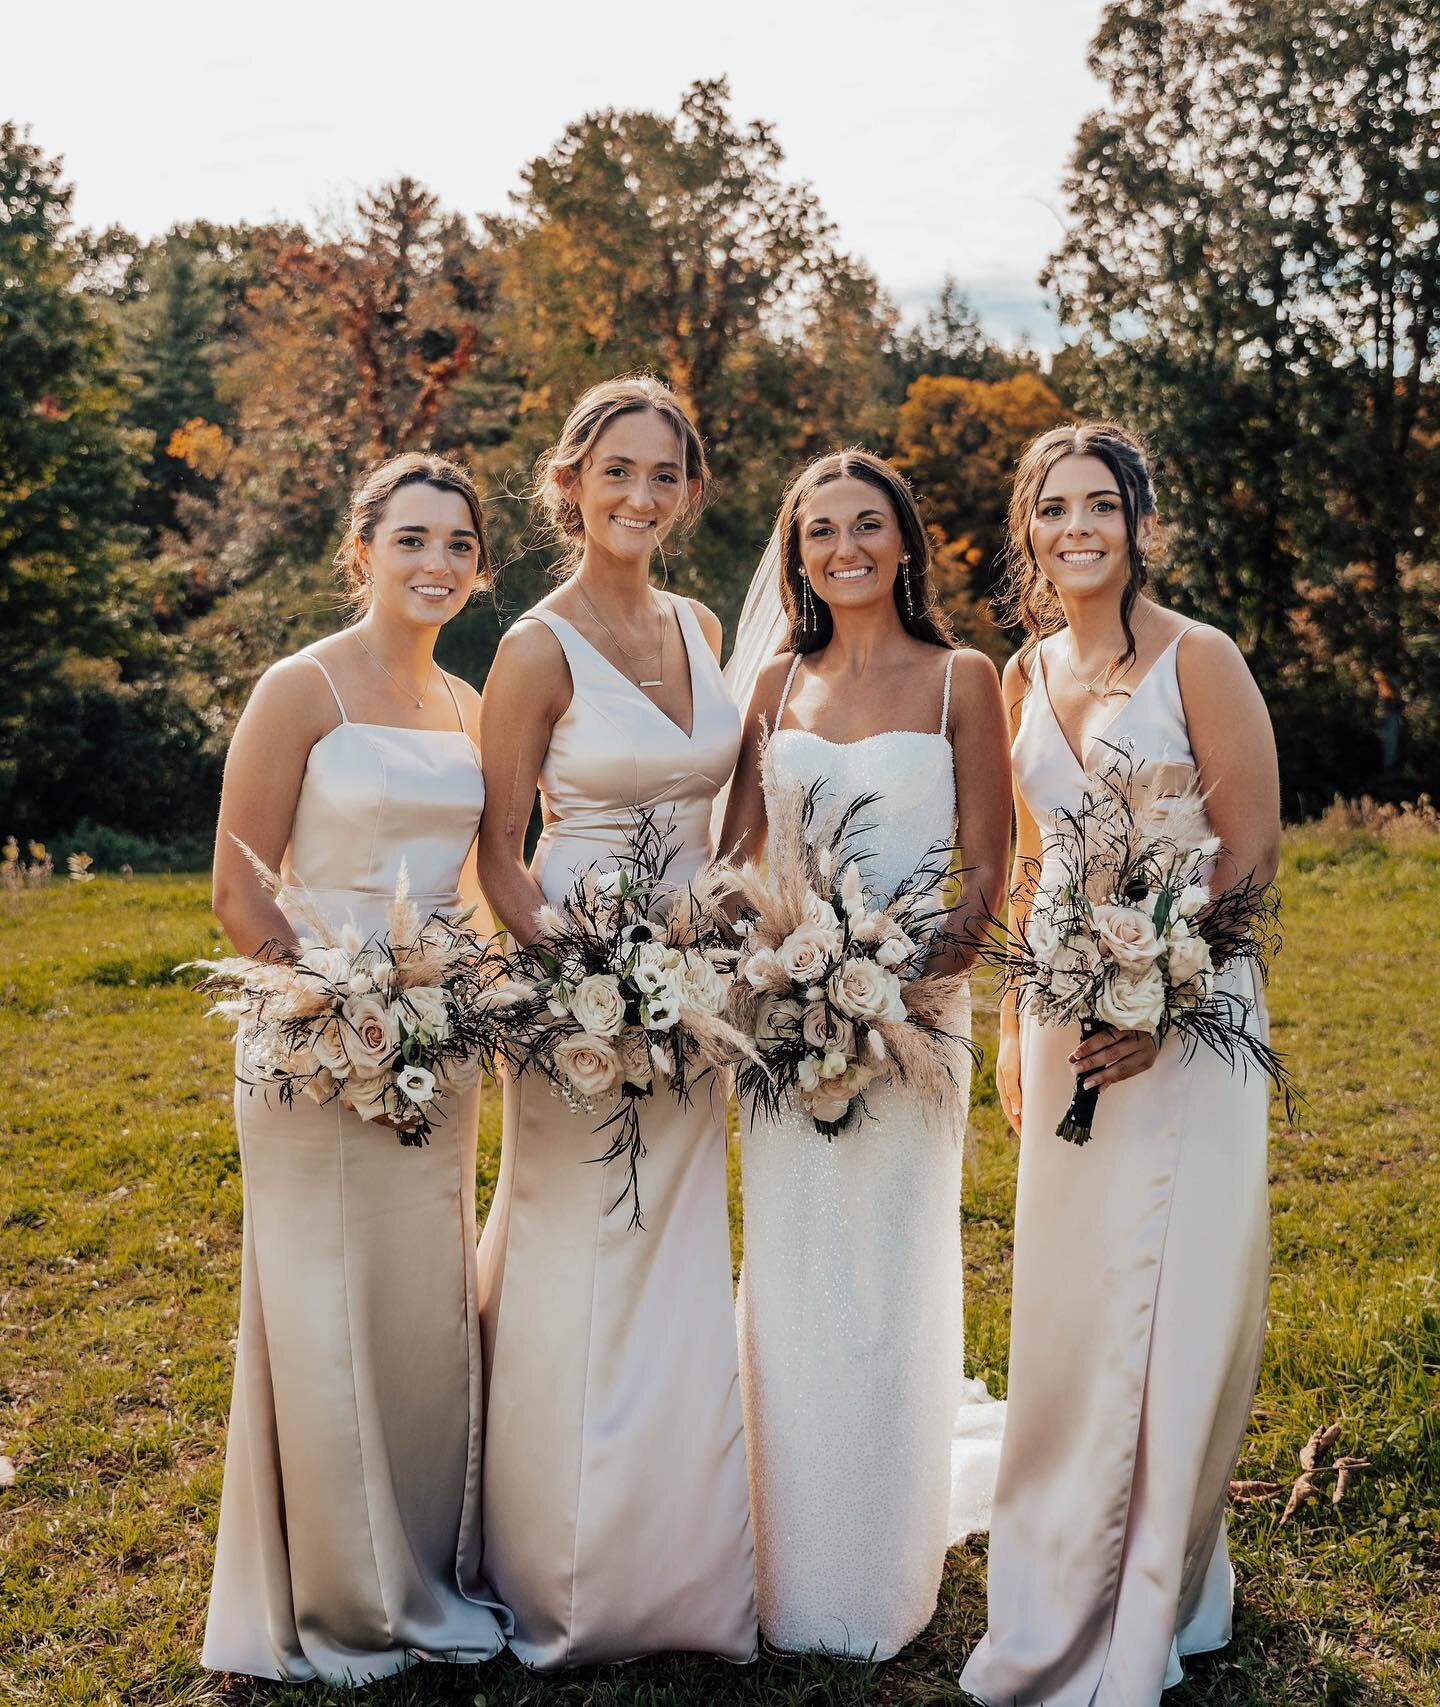 Our gorgeous #lilylady Theresa with her ladies in @amsale 🤍

#amsale #amsalebridesmaids #champagnebridesmaids #fallwedding #upstatenywedding #lilybride